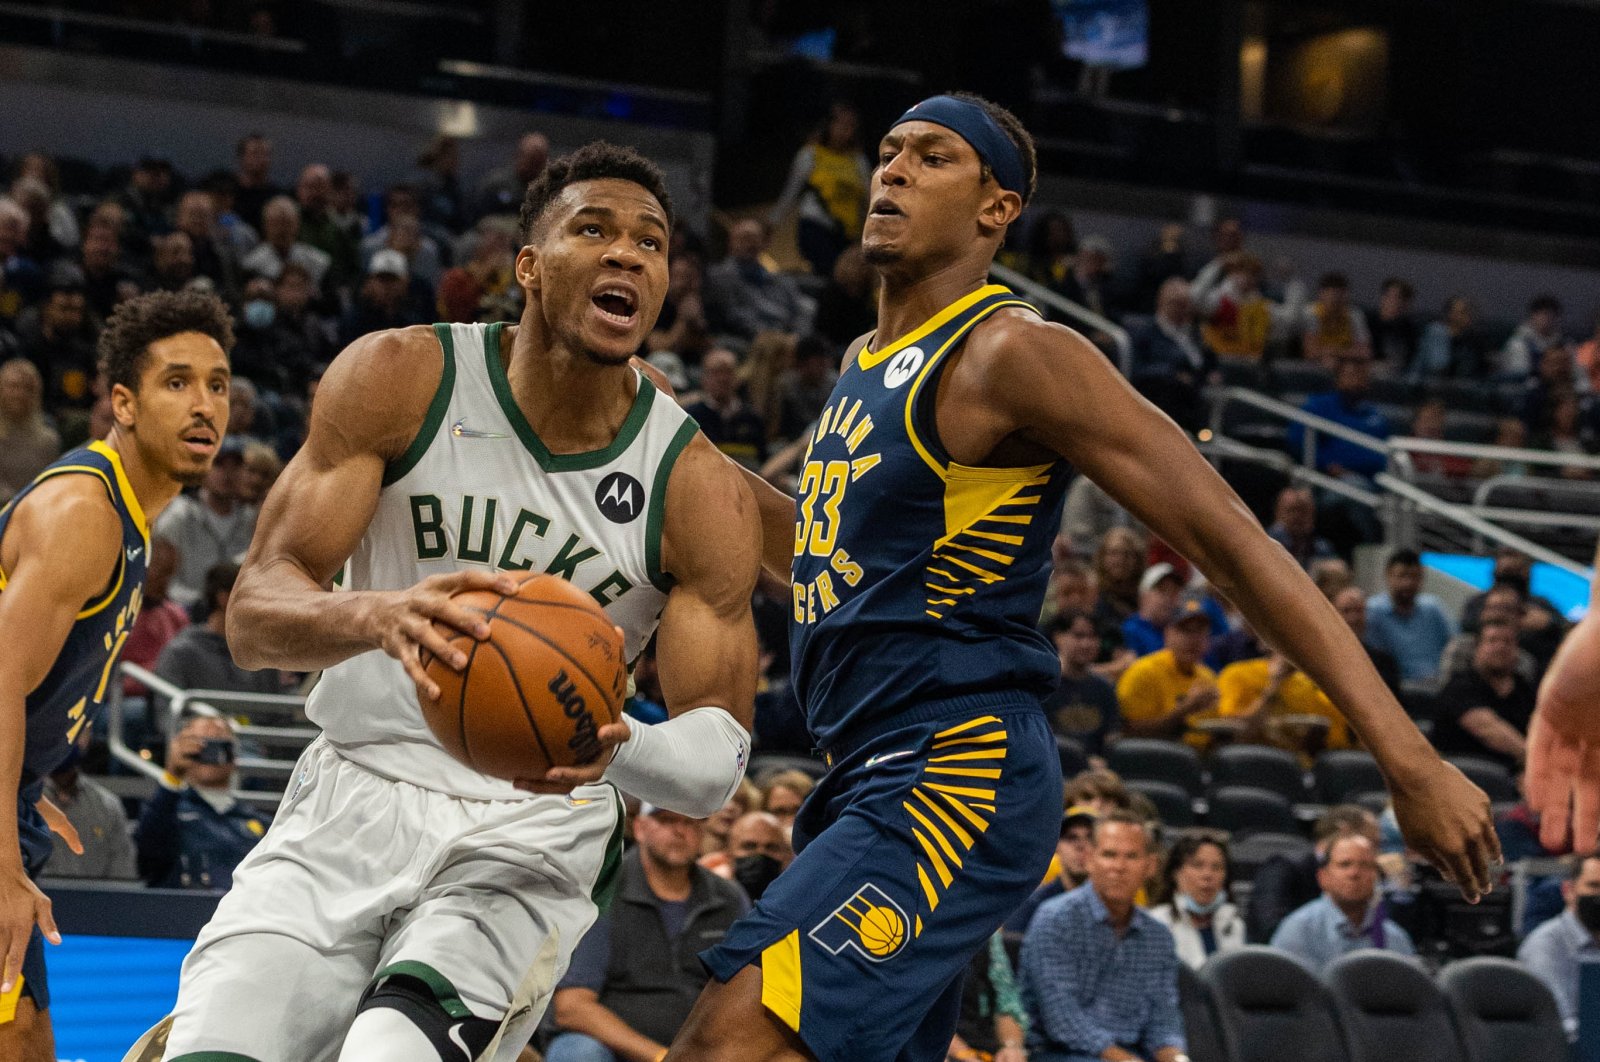 Milwaukee Bucks forward Giannis Antetokounmpo (L) shoots the ball past Indiana Pacers center Myles Turner (R) during an NBA match in Indianapolis, Indiana, U.S., Oct 25, 2021. (Reuters Photo)